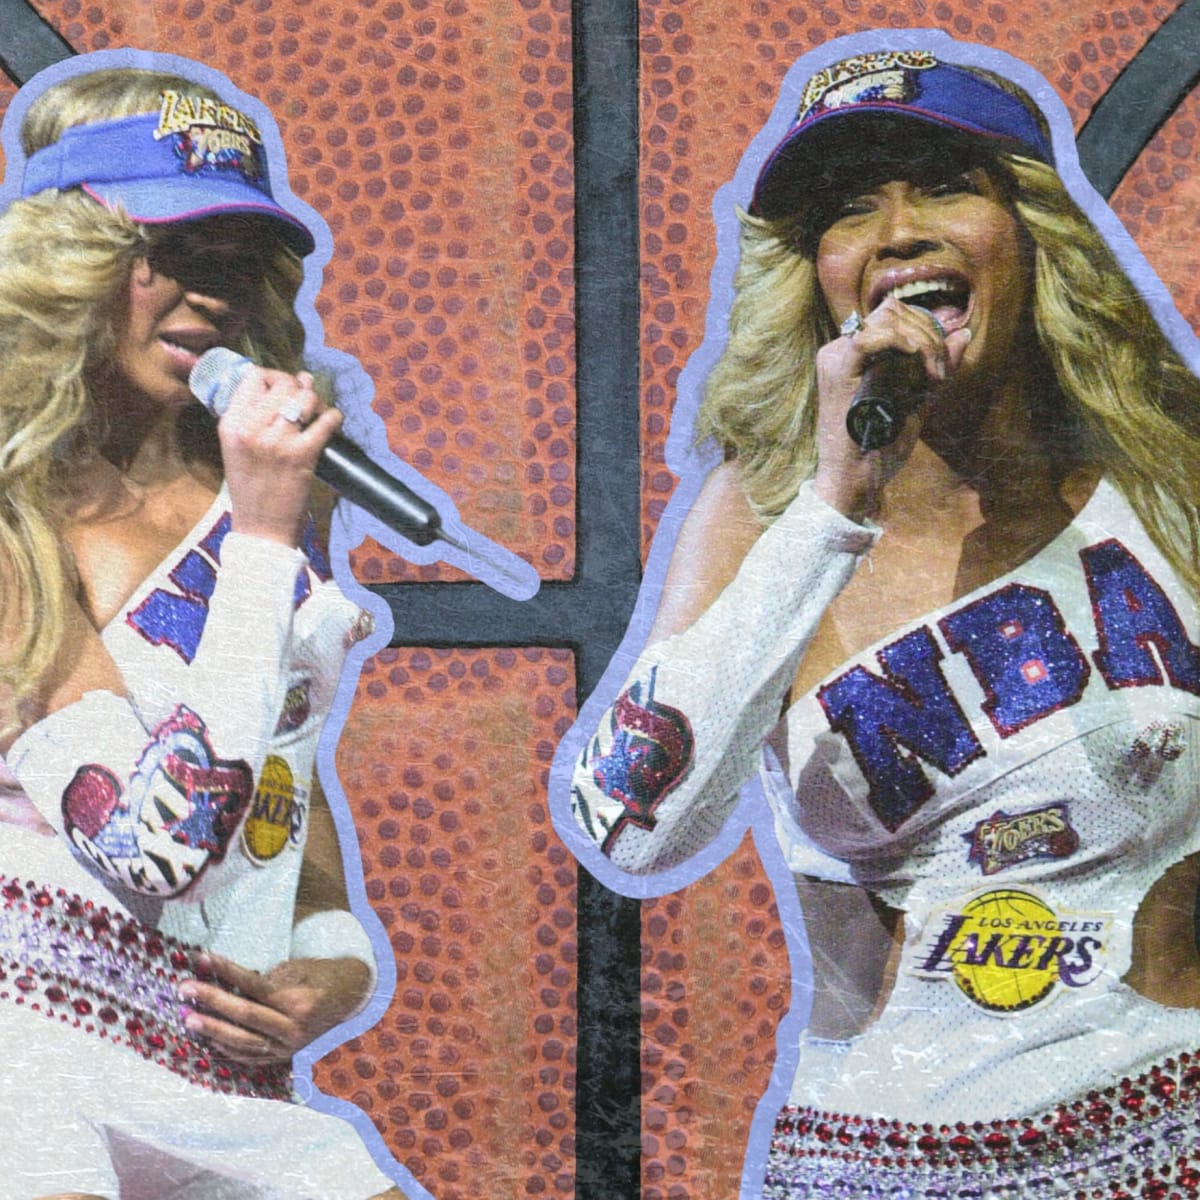 15 Years Ago Today, Sixers Fans Booed Beyoncé